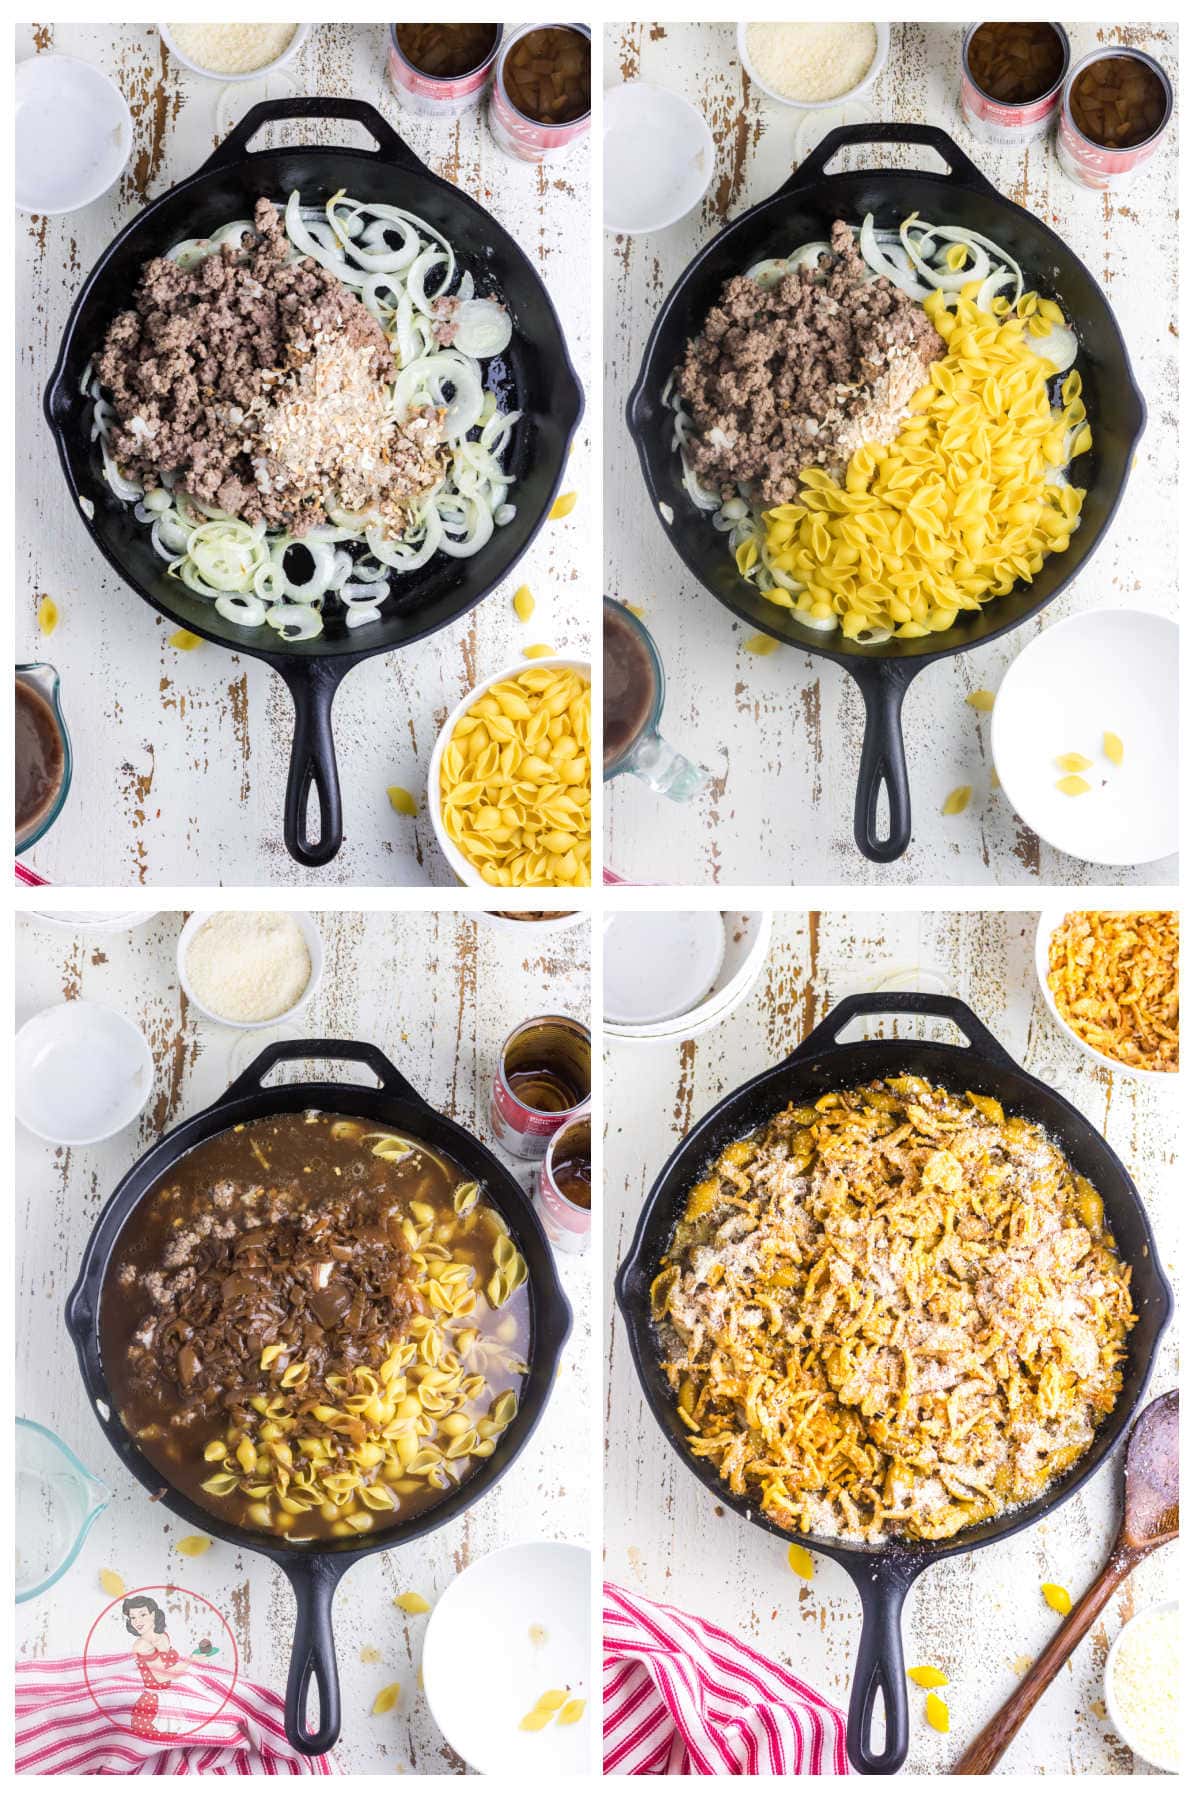 Step by step images showing how to make French Onion Hamburger Casserole.